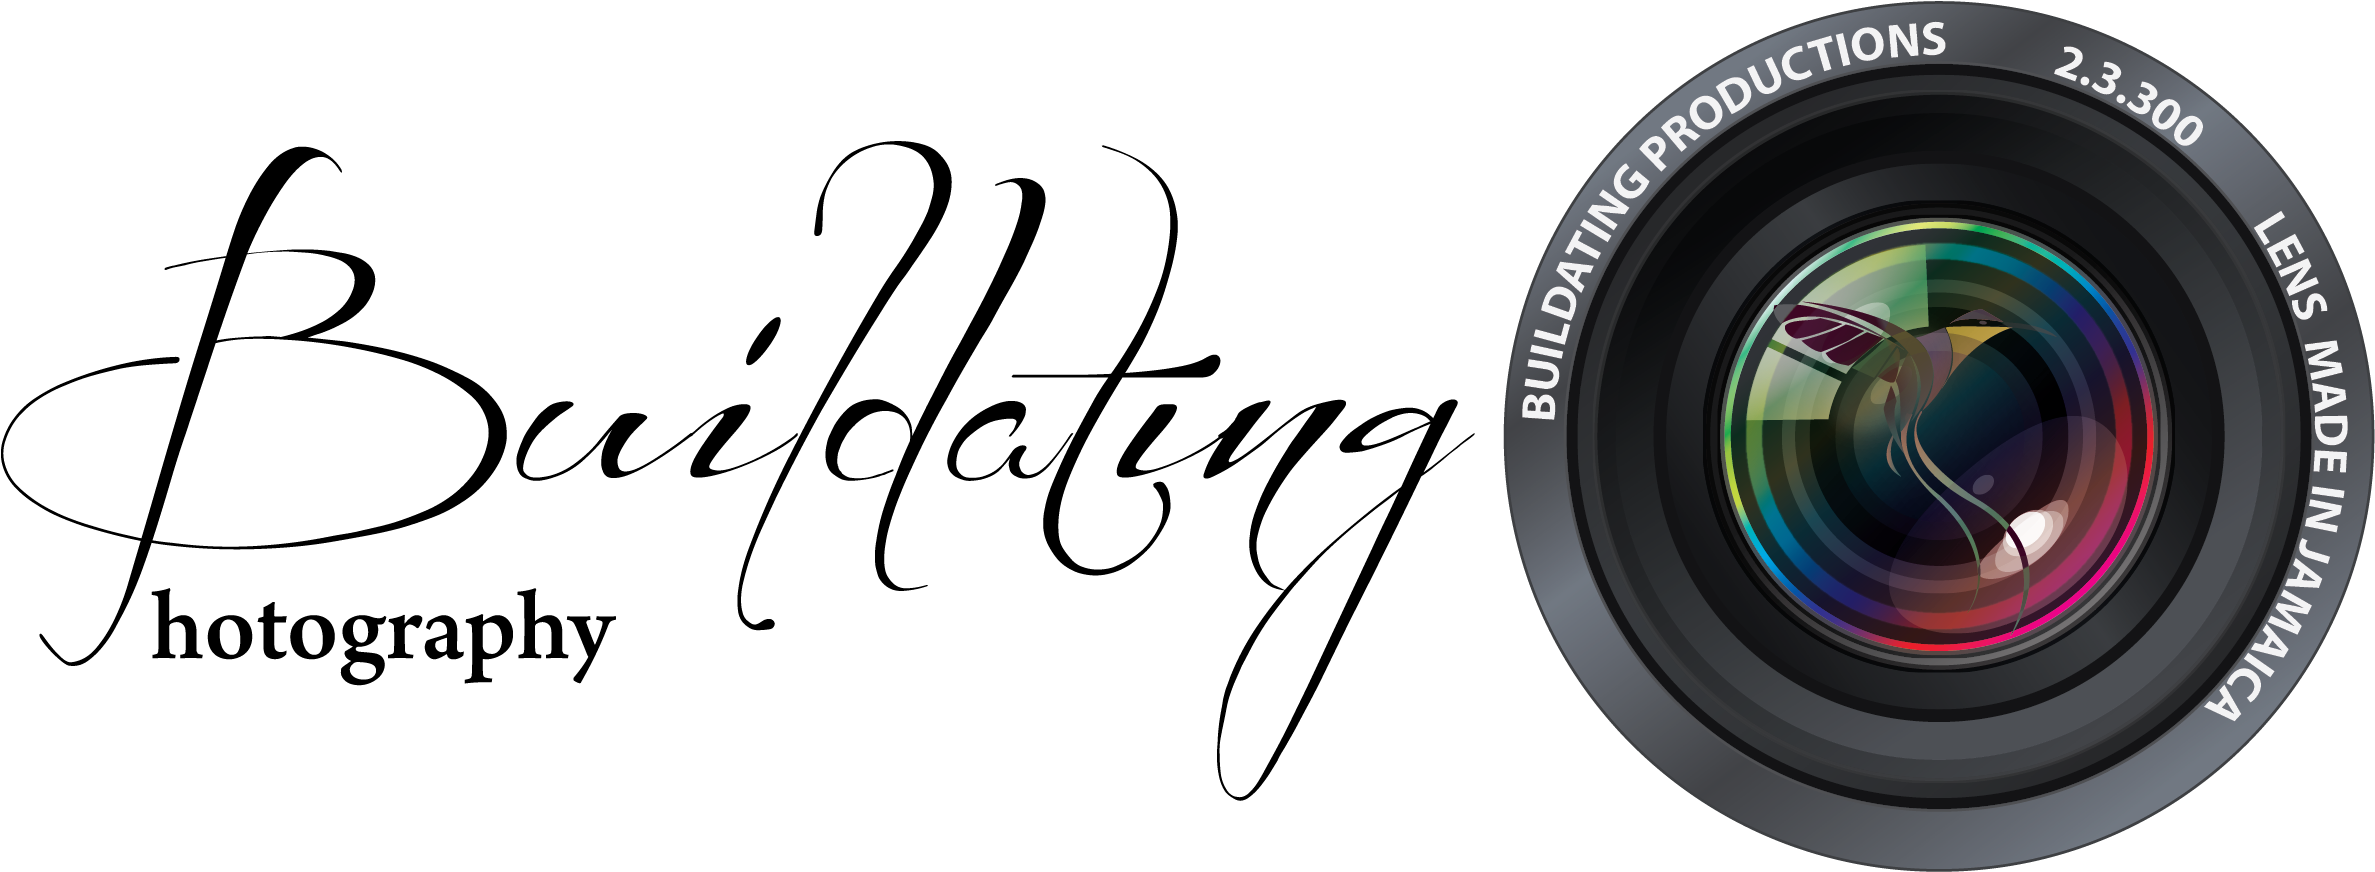 Buildating Photography Logowith Camera Lens PNG